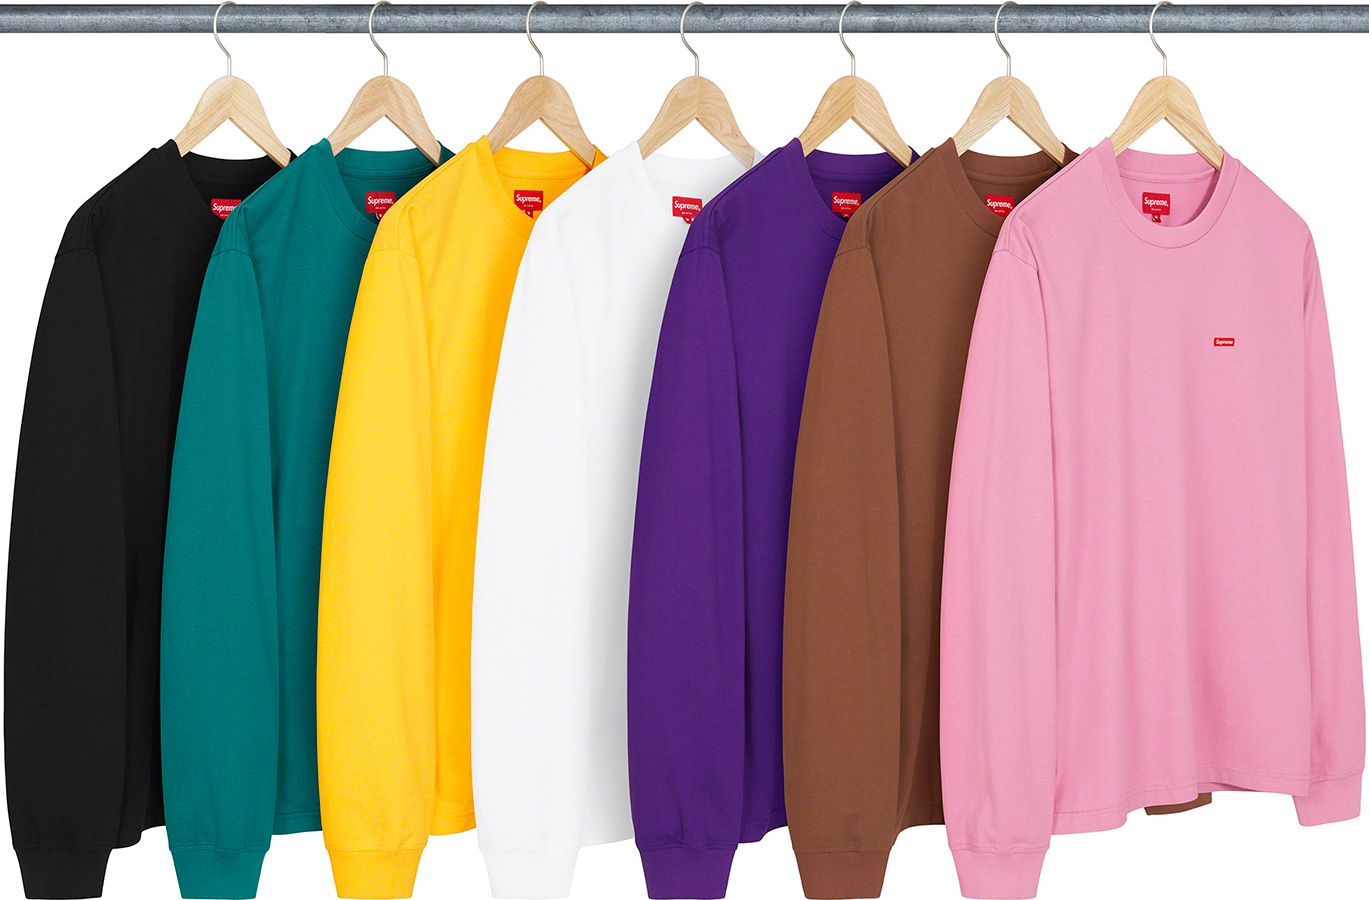 Small Box L/S Tee - Spring/Summer 2022 Preview &ndash; Supreme